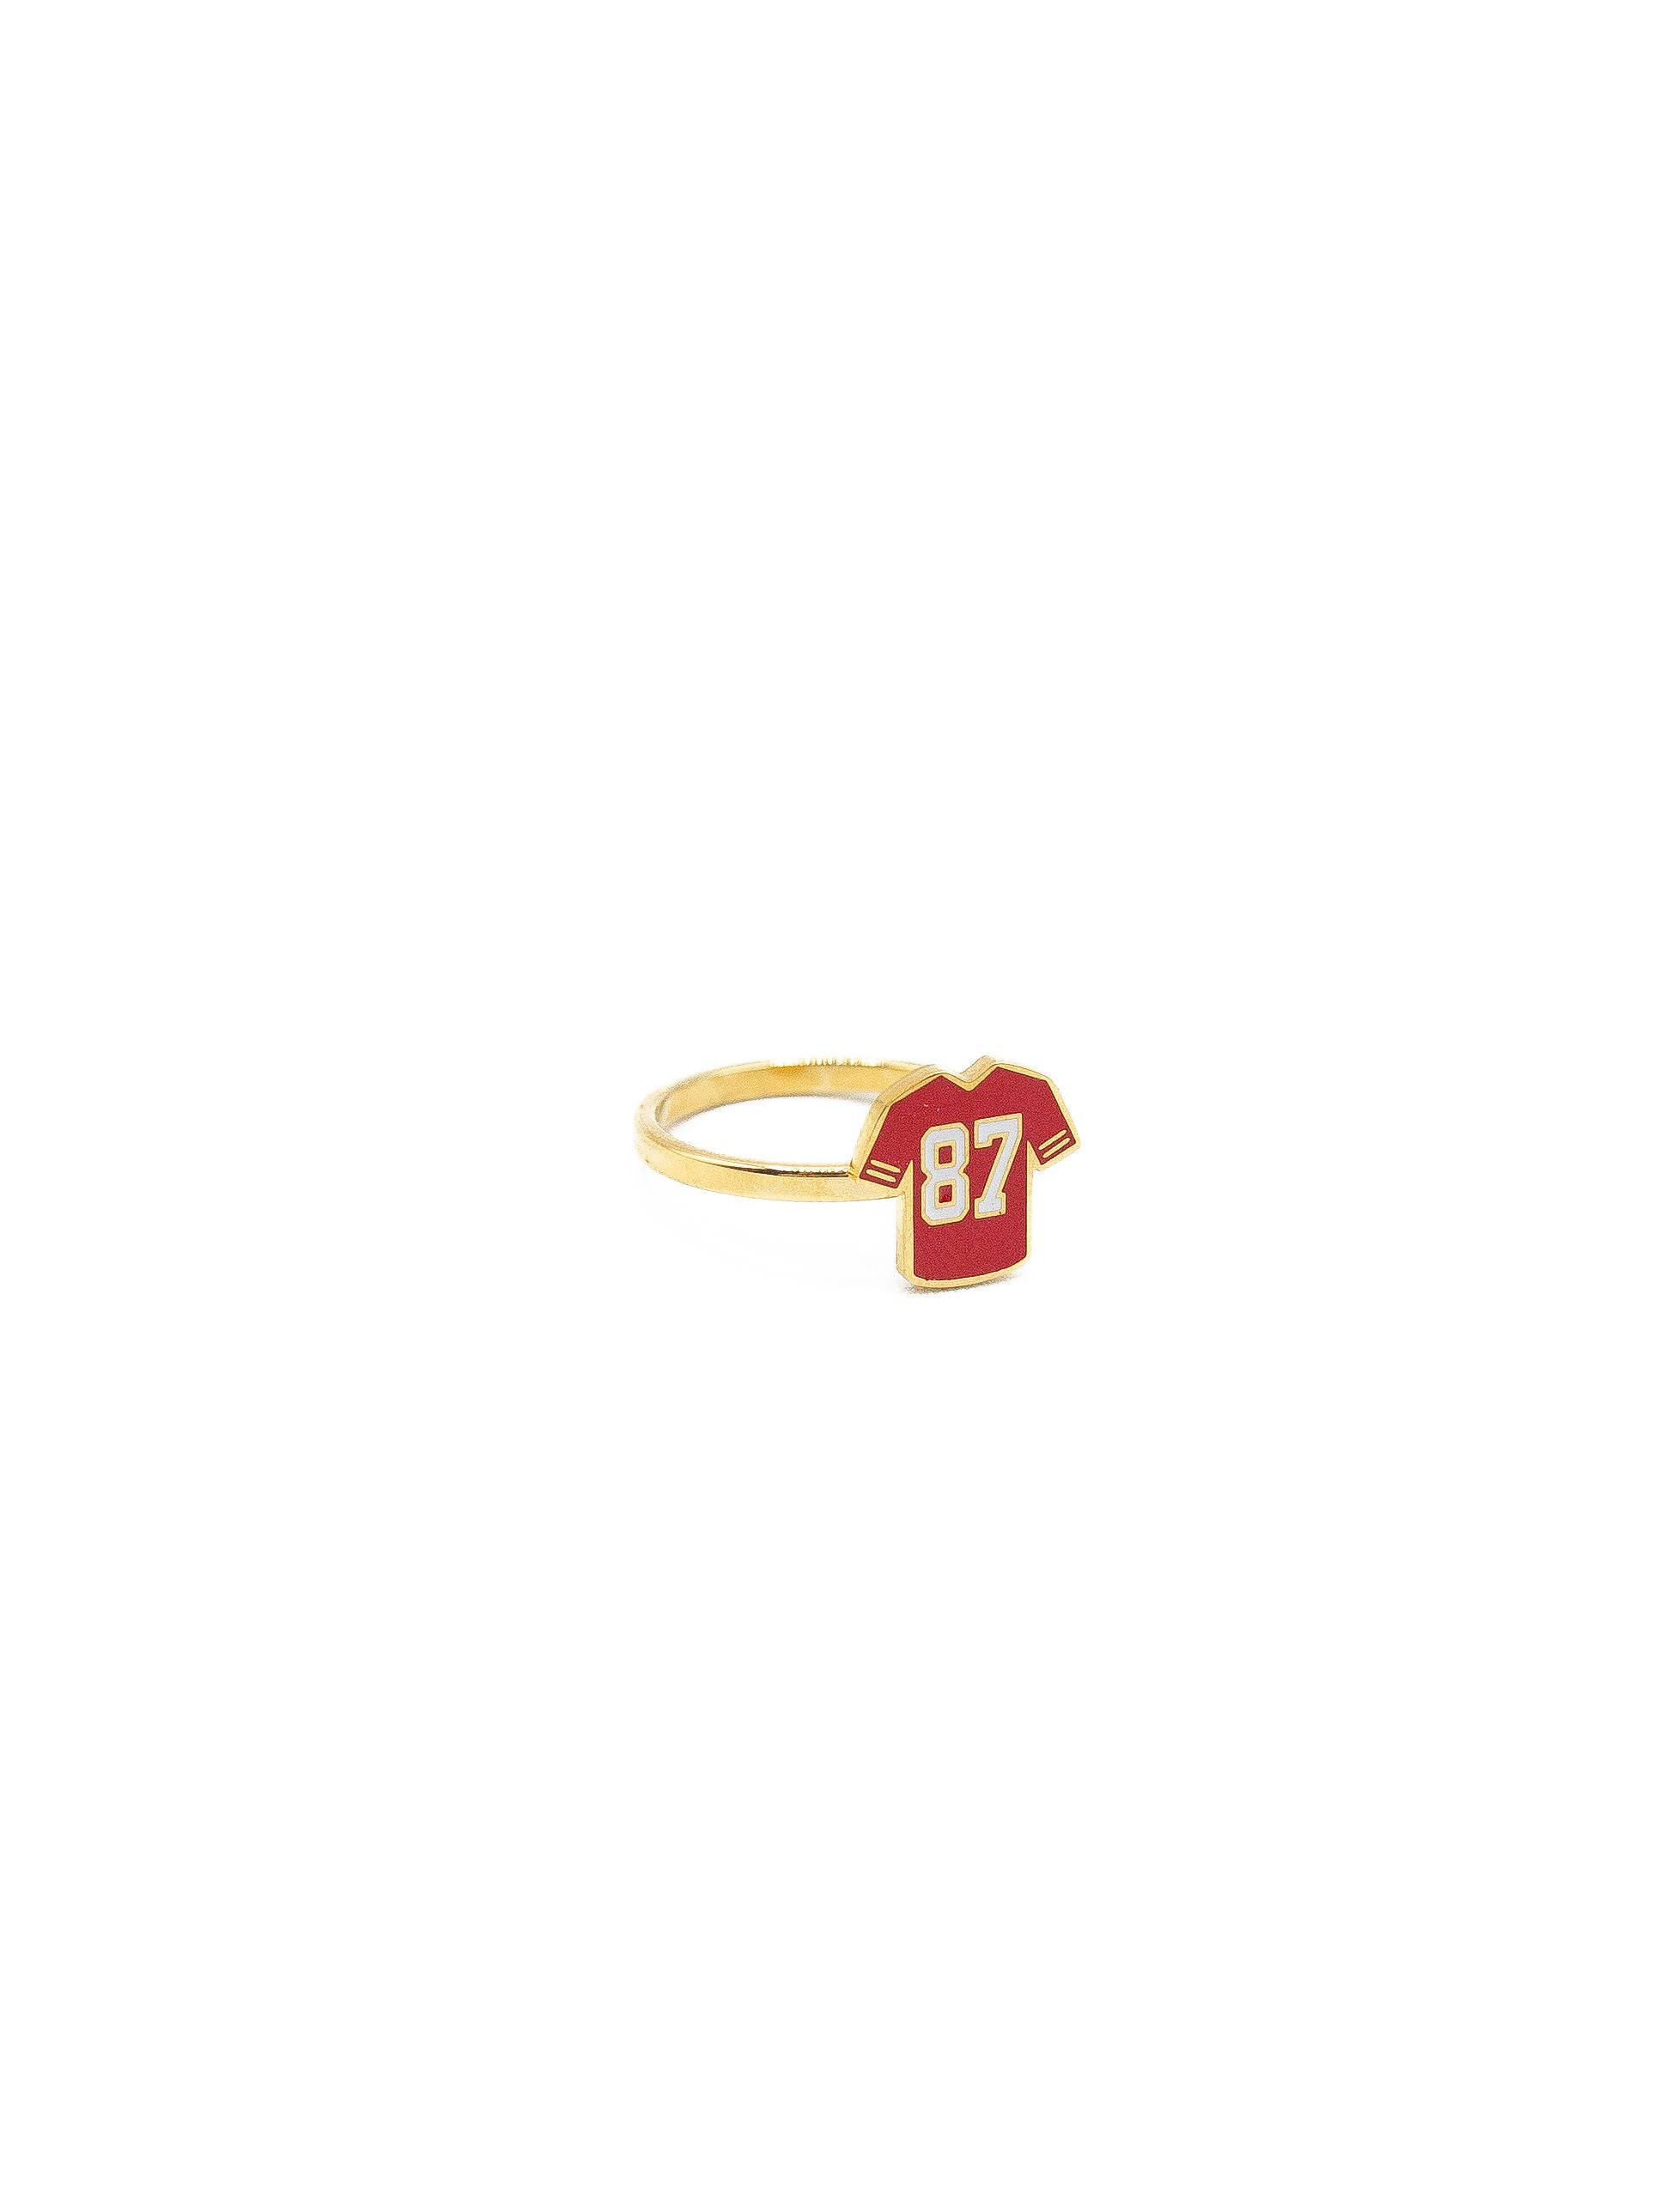 Kansas City Chiefs #87 Tight End Jersey Ring